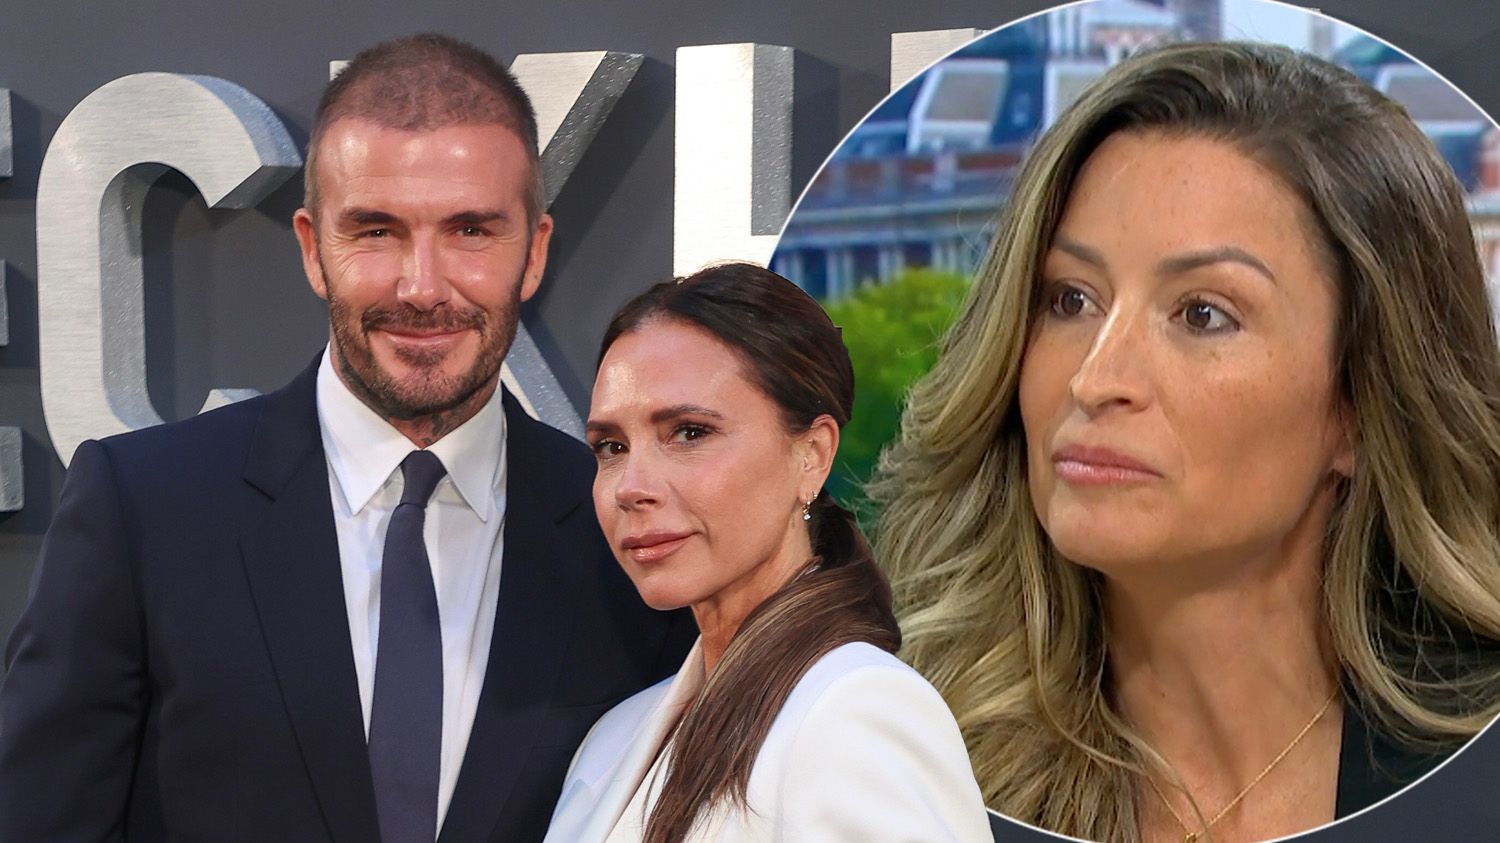 David Beckham Reveals the 'Greatest Thing' Wife Victoria Has Ever